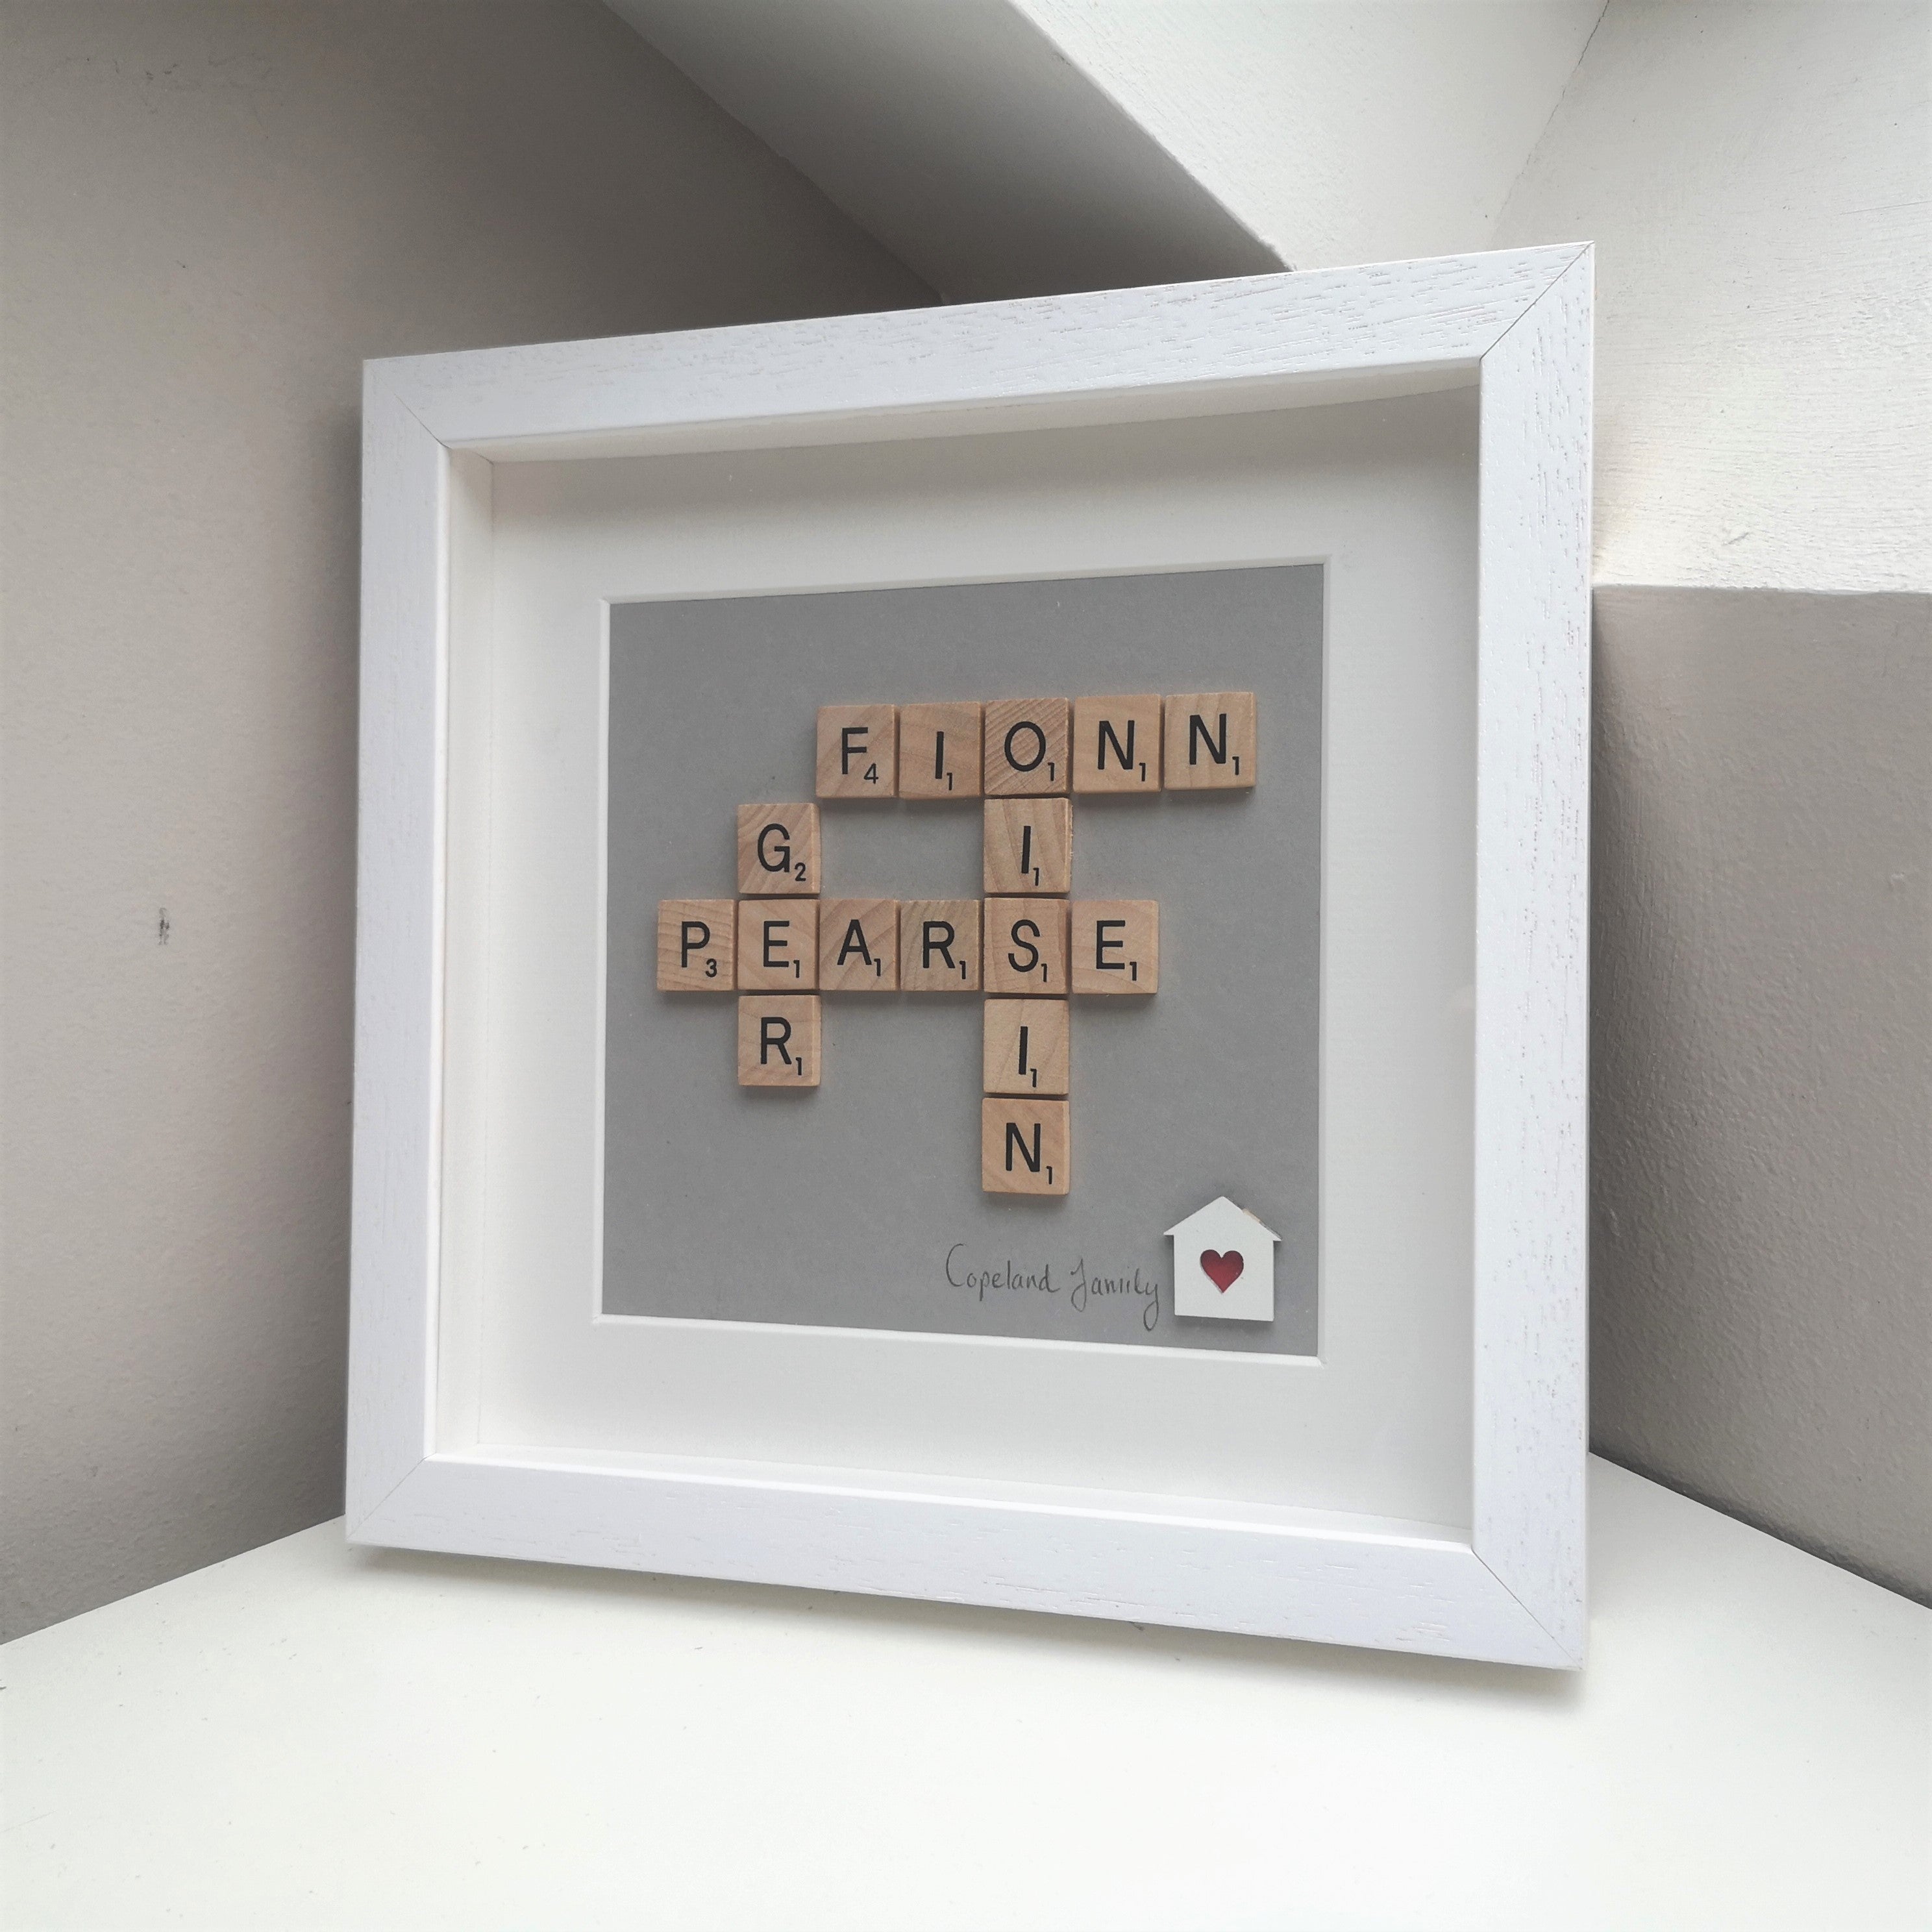 Family Names in wooden scrabble tiles on grey background with little wooden house and heart heartcut in a handmade white 25x25cm deep box wooden frame